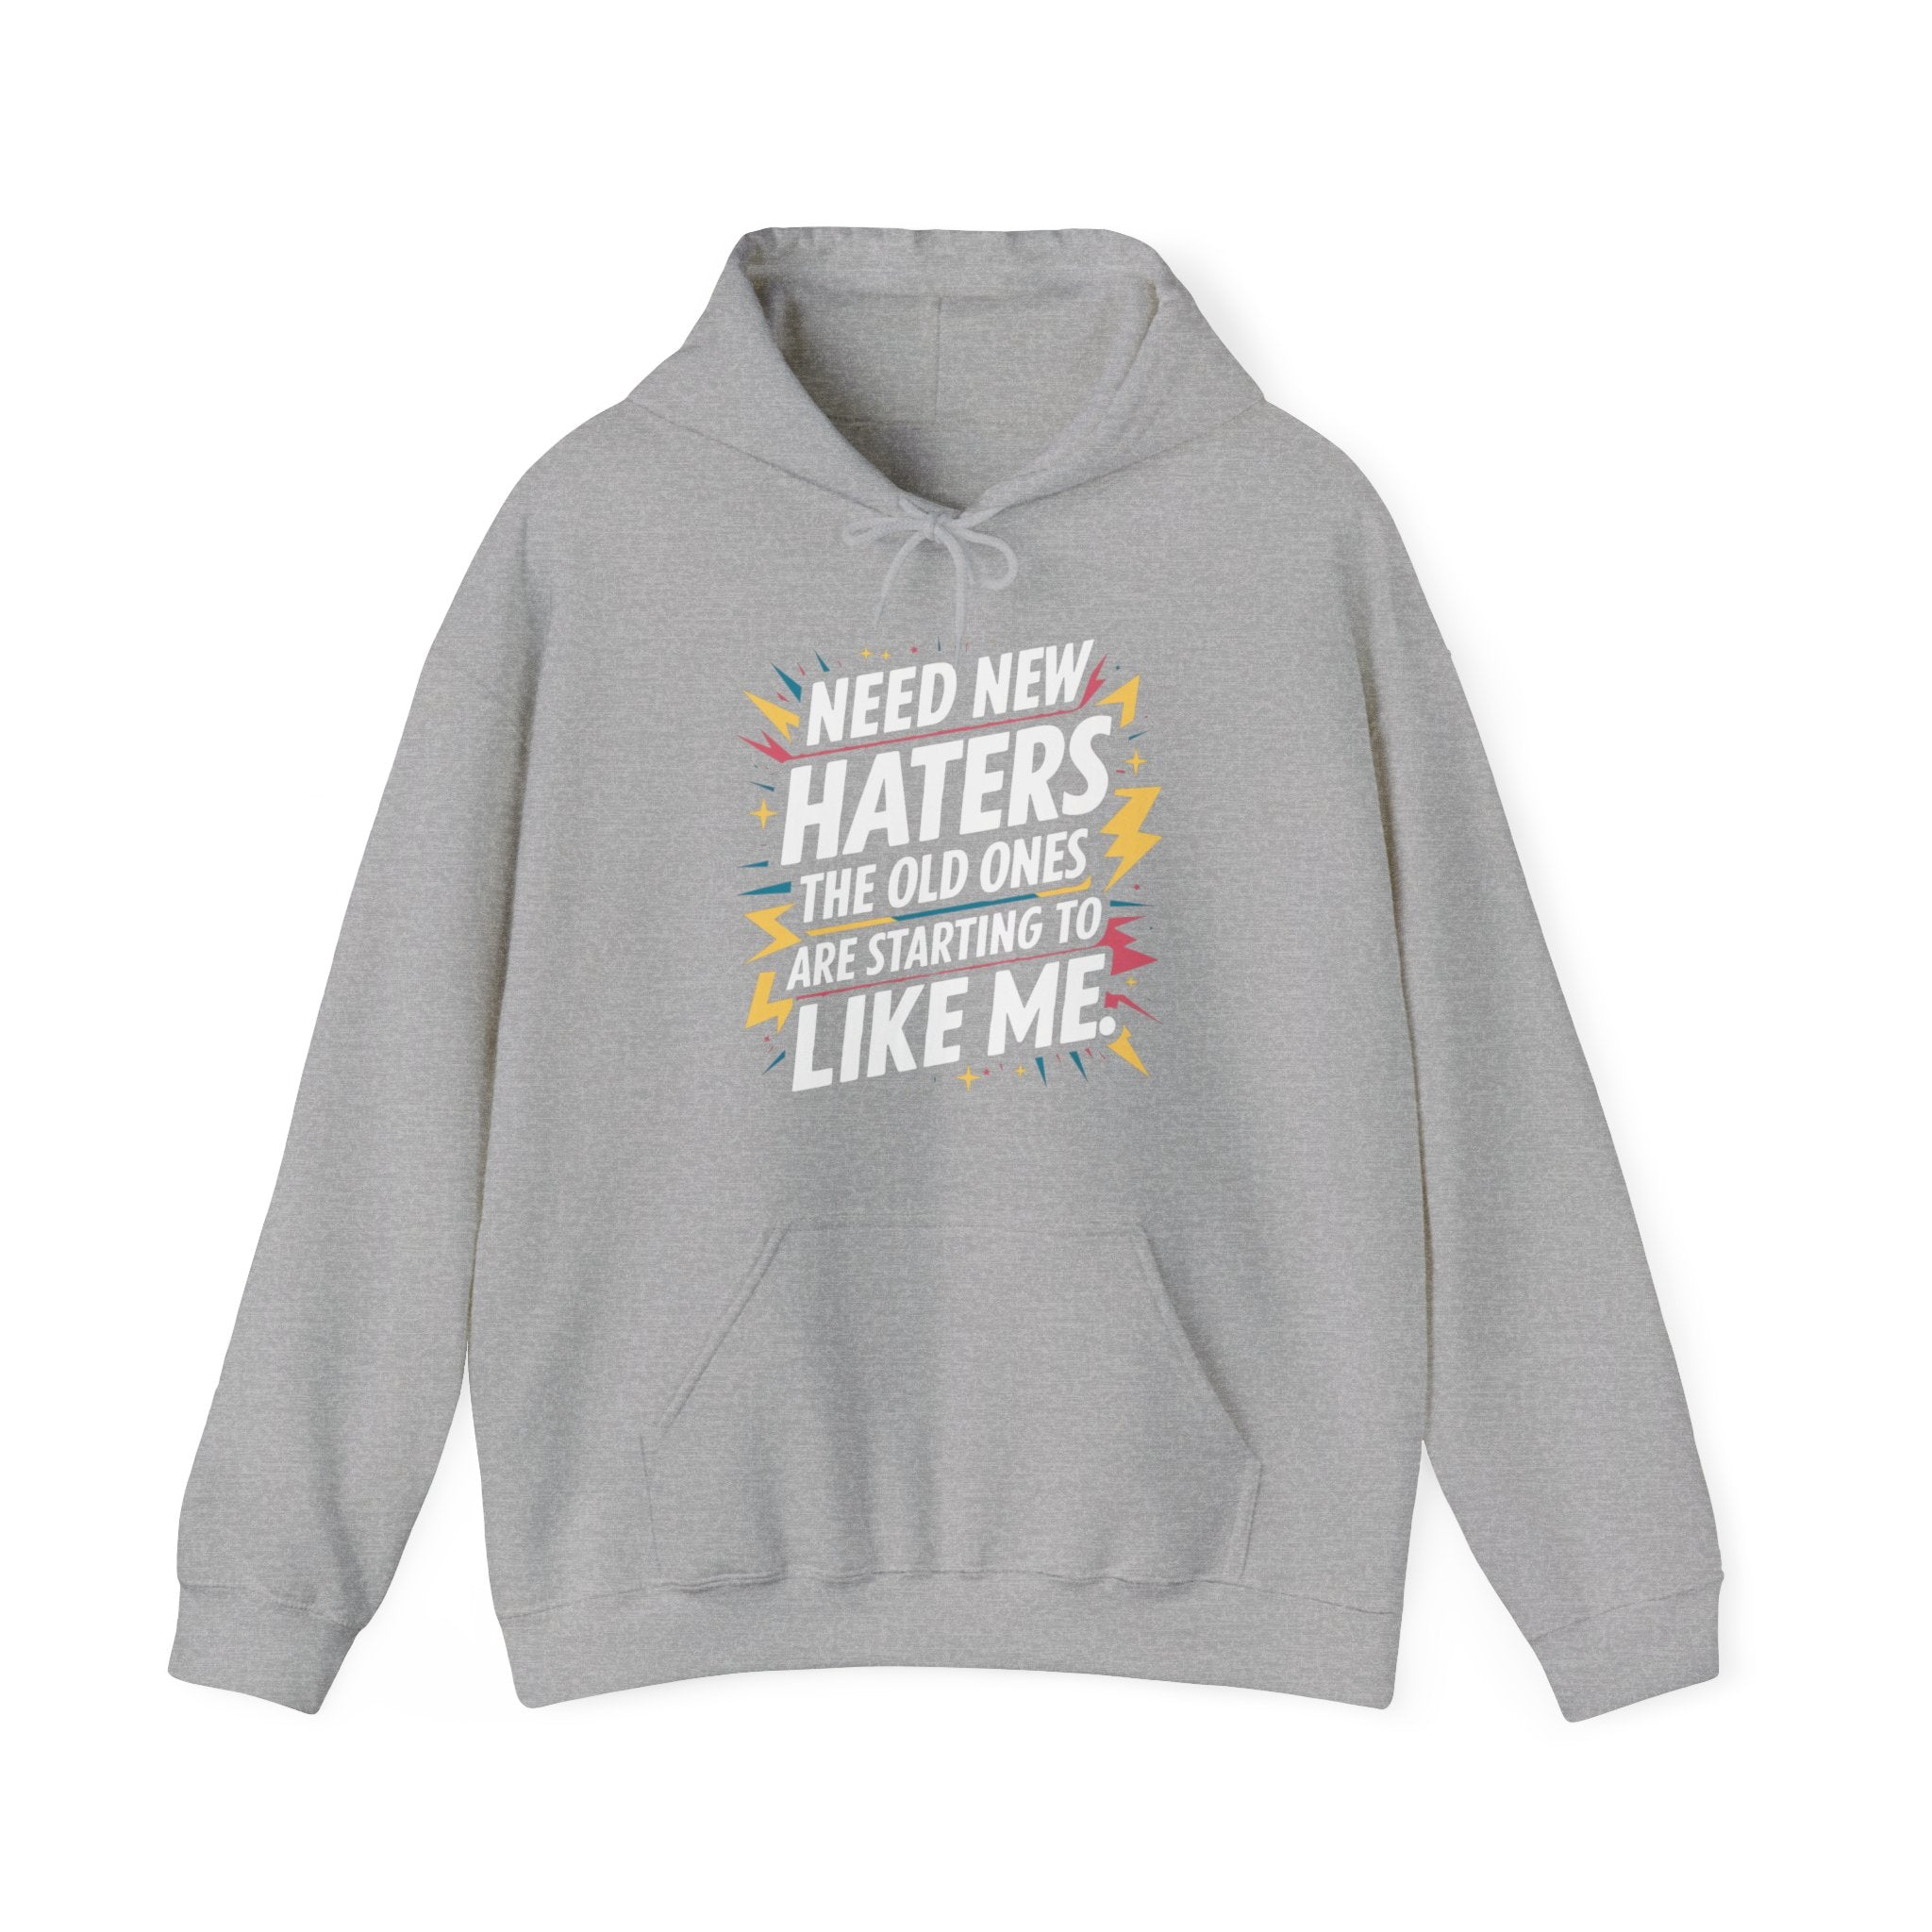 Attitude Hoodie For Men Haters